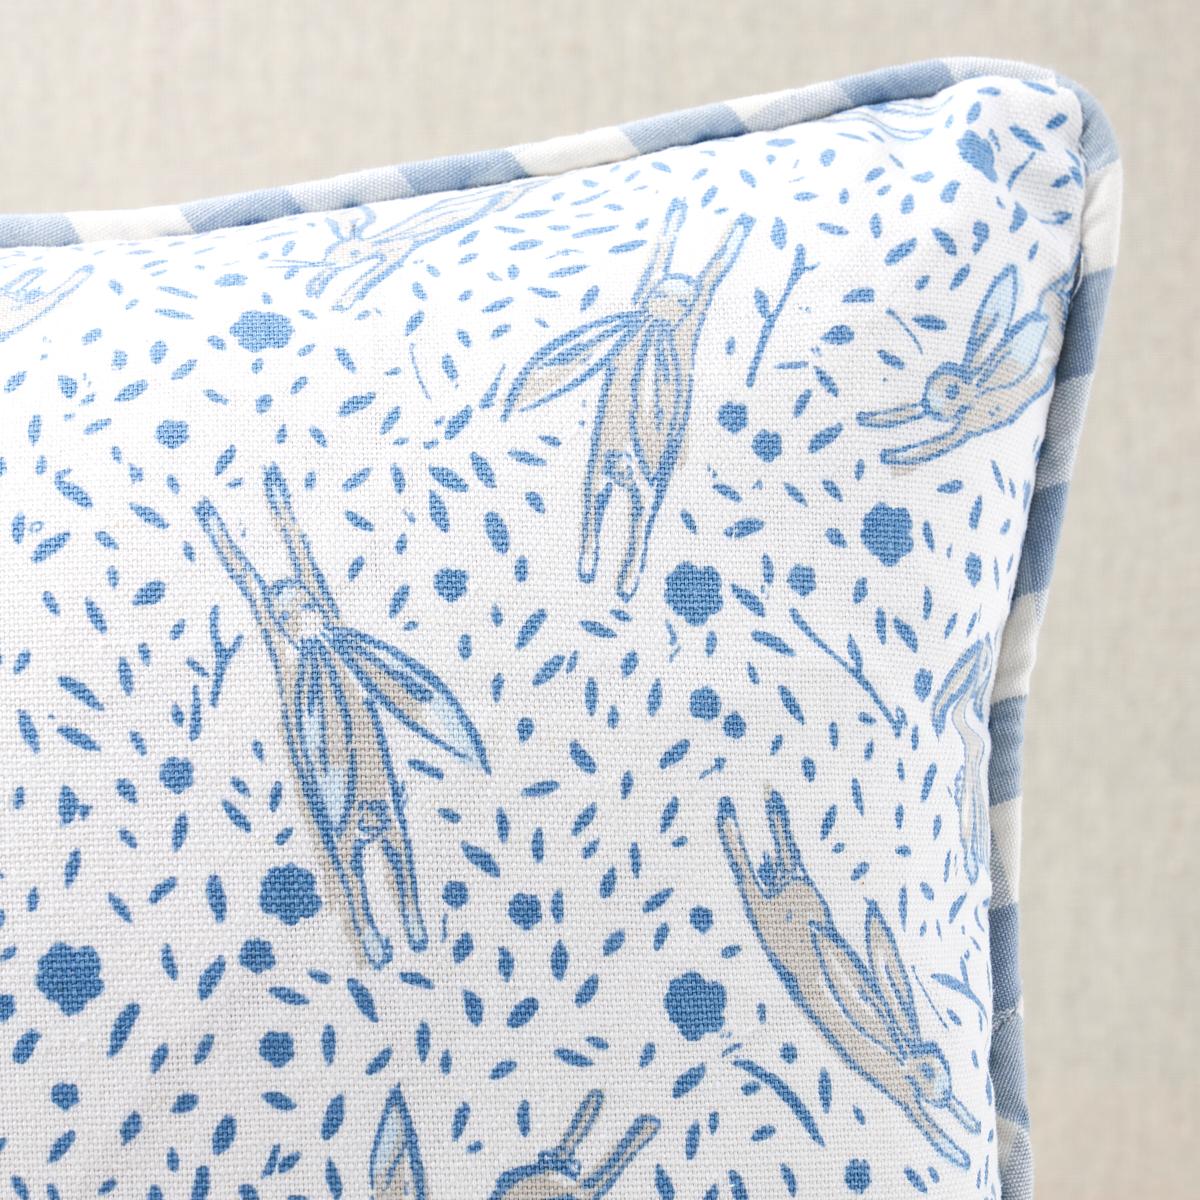 This pillow features Rabbit High-Performance Print by Marie-Chantal of Greece for Schumacher. Marie-Chantal’s Rabbit High-Performance Print in blue is a cheery small-scale critter pattern on a lovely cotton-linen ground. Pillow is finished with a